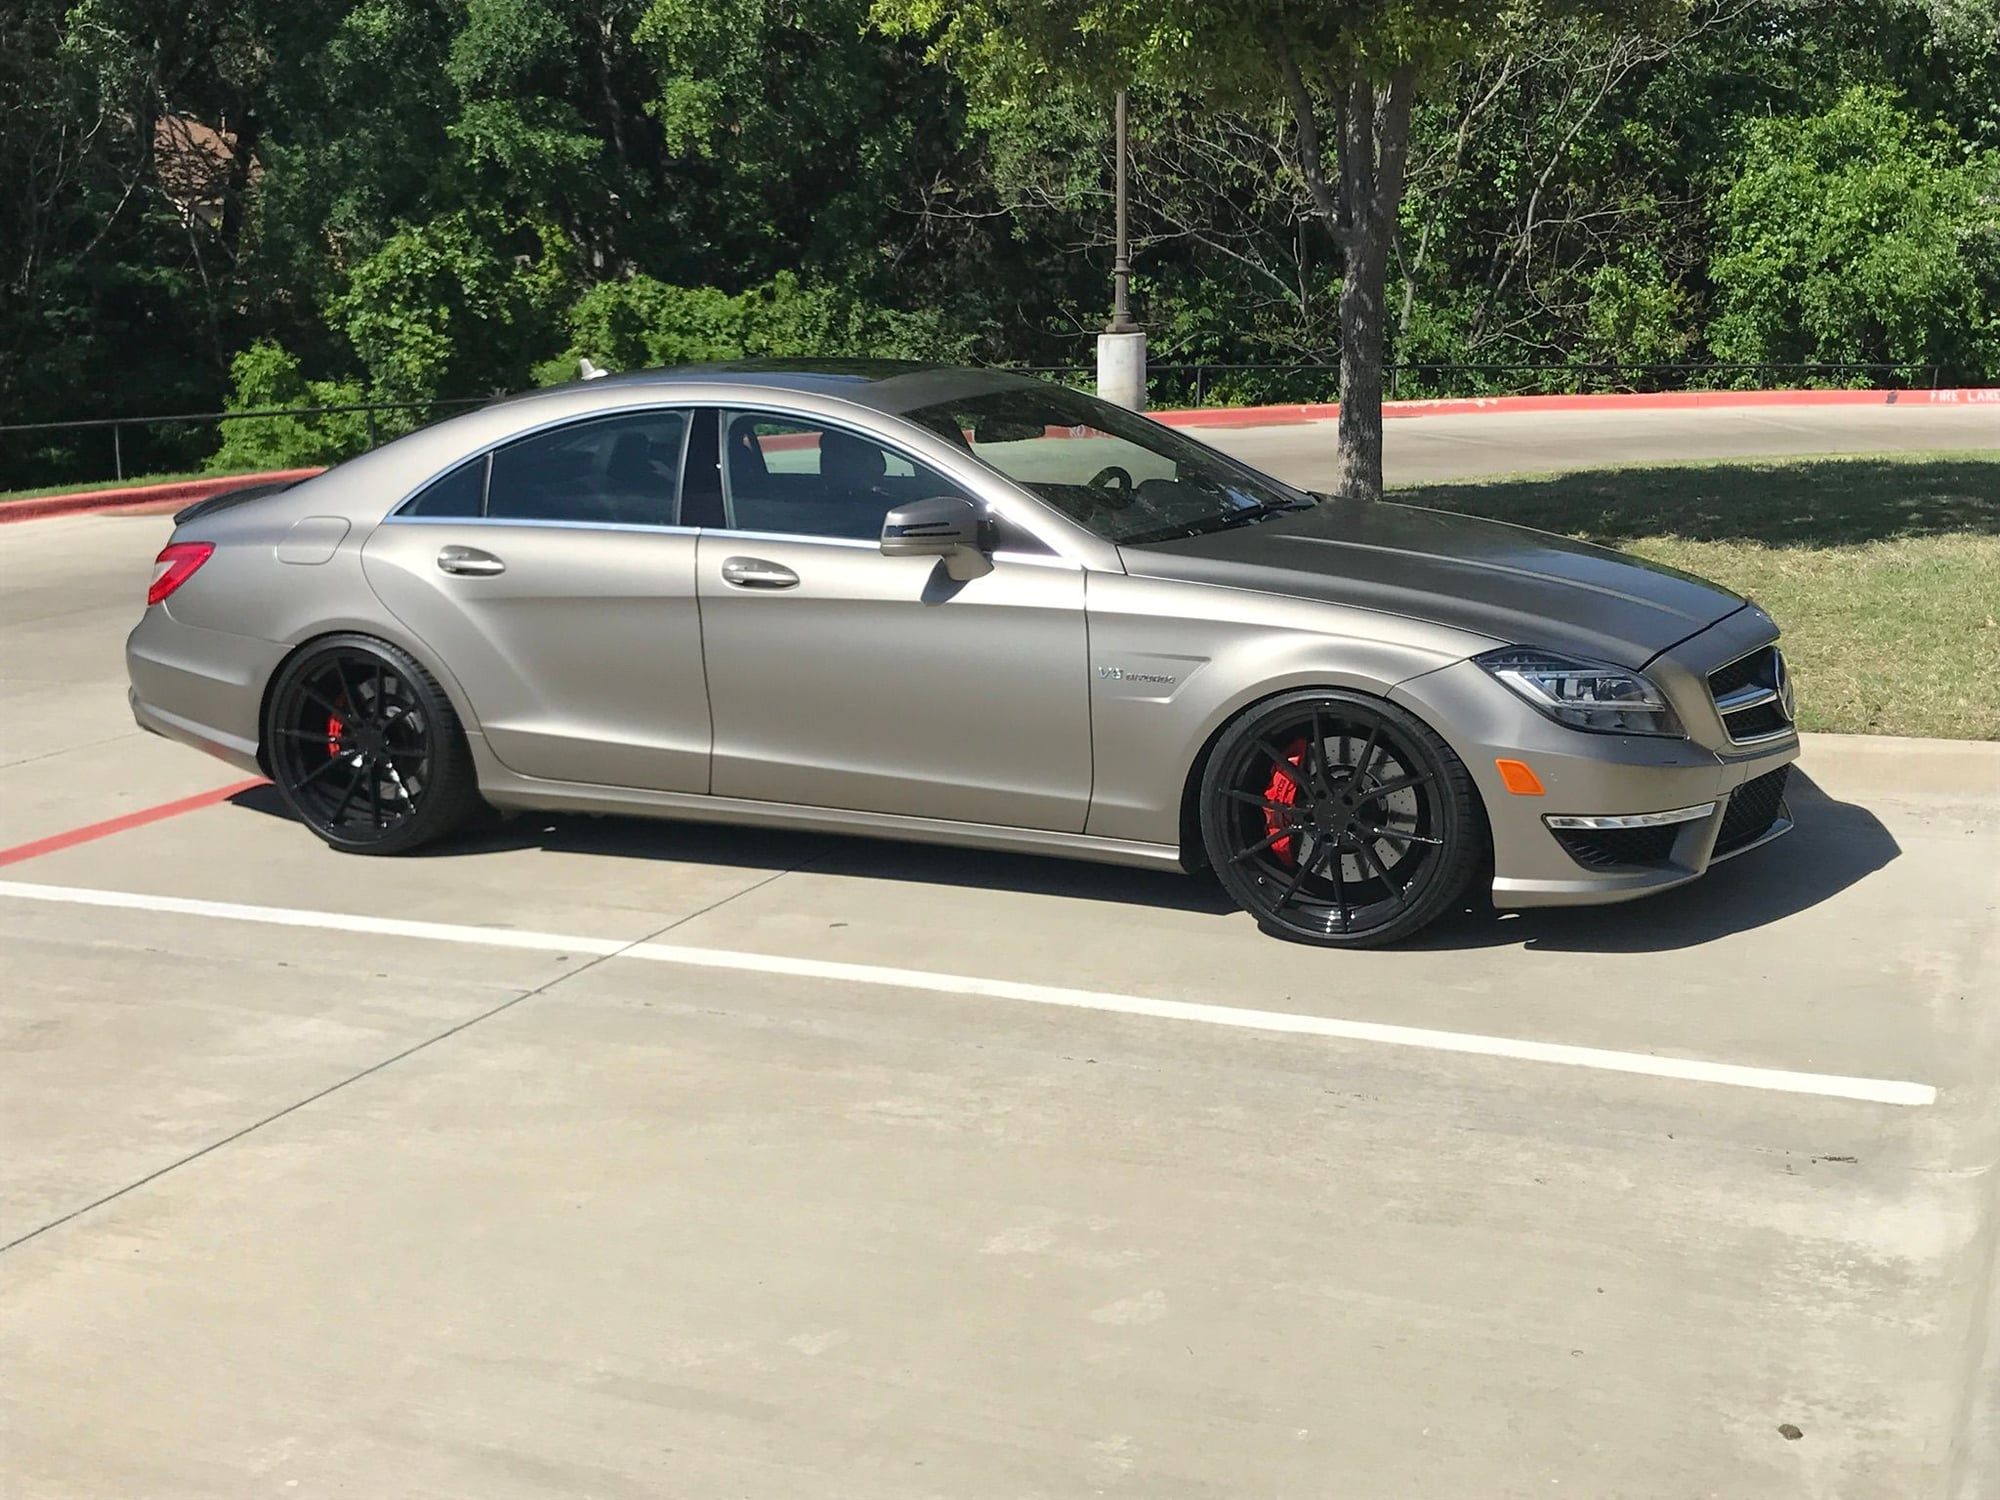 2012 Mercedes-Benz CLS63 AMG - 2012 CLS63 PCE 1 of 30 ever made - Used - VIN WDDLJ7EB0CA031511 - 8 cyl - 2WD - Automatic - Sedan - Other - Keller, TX 76244, United States